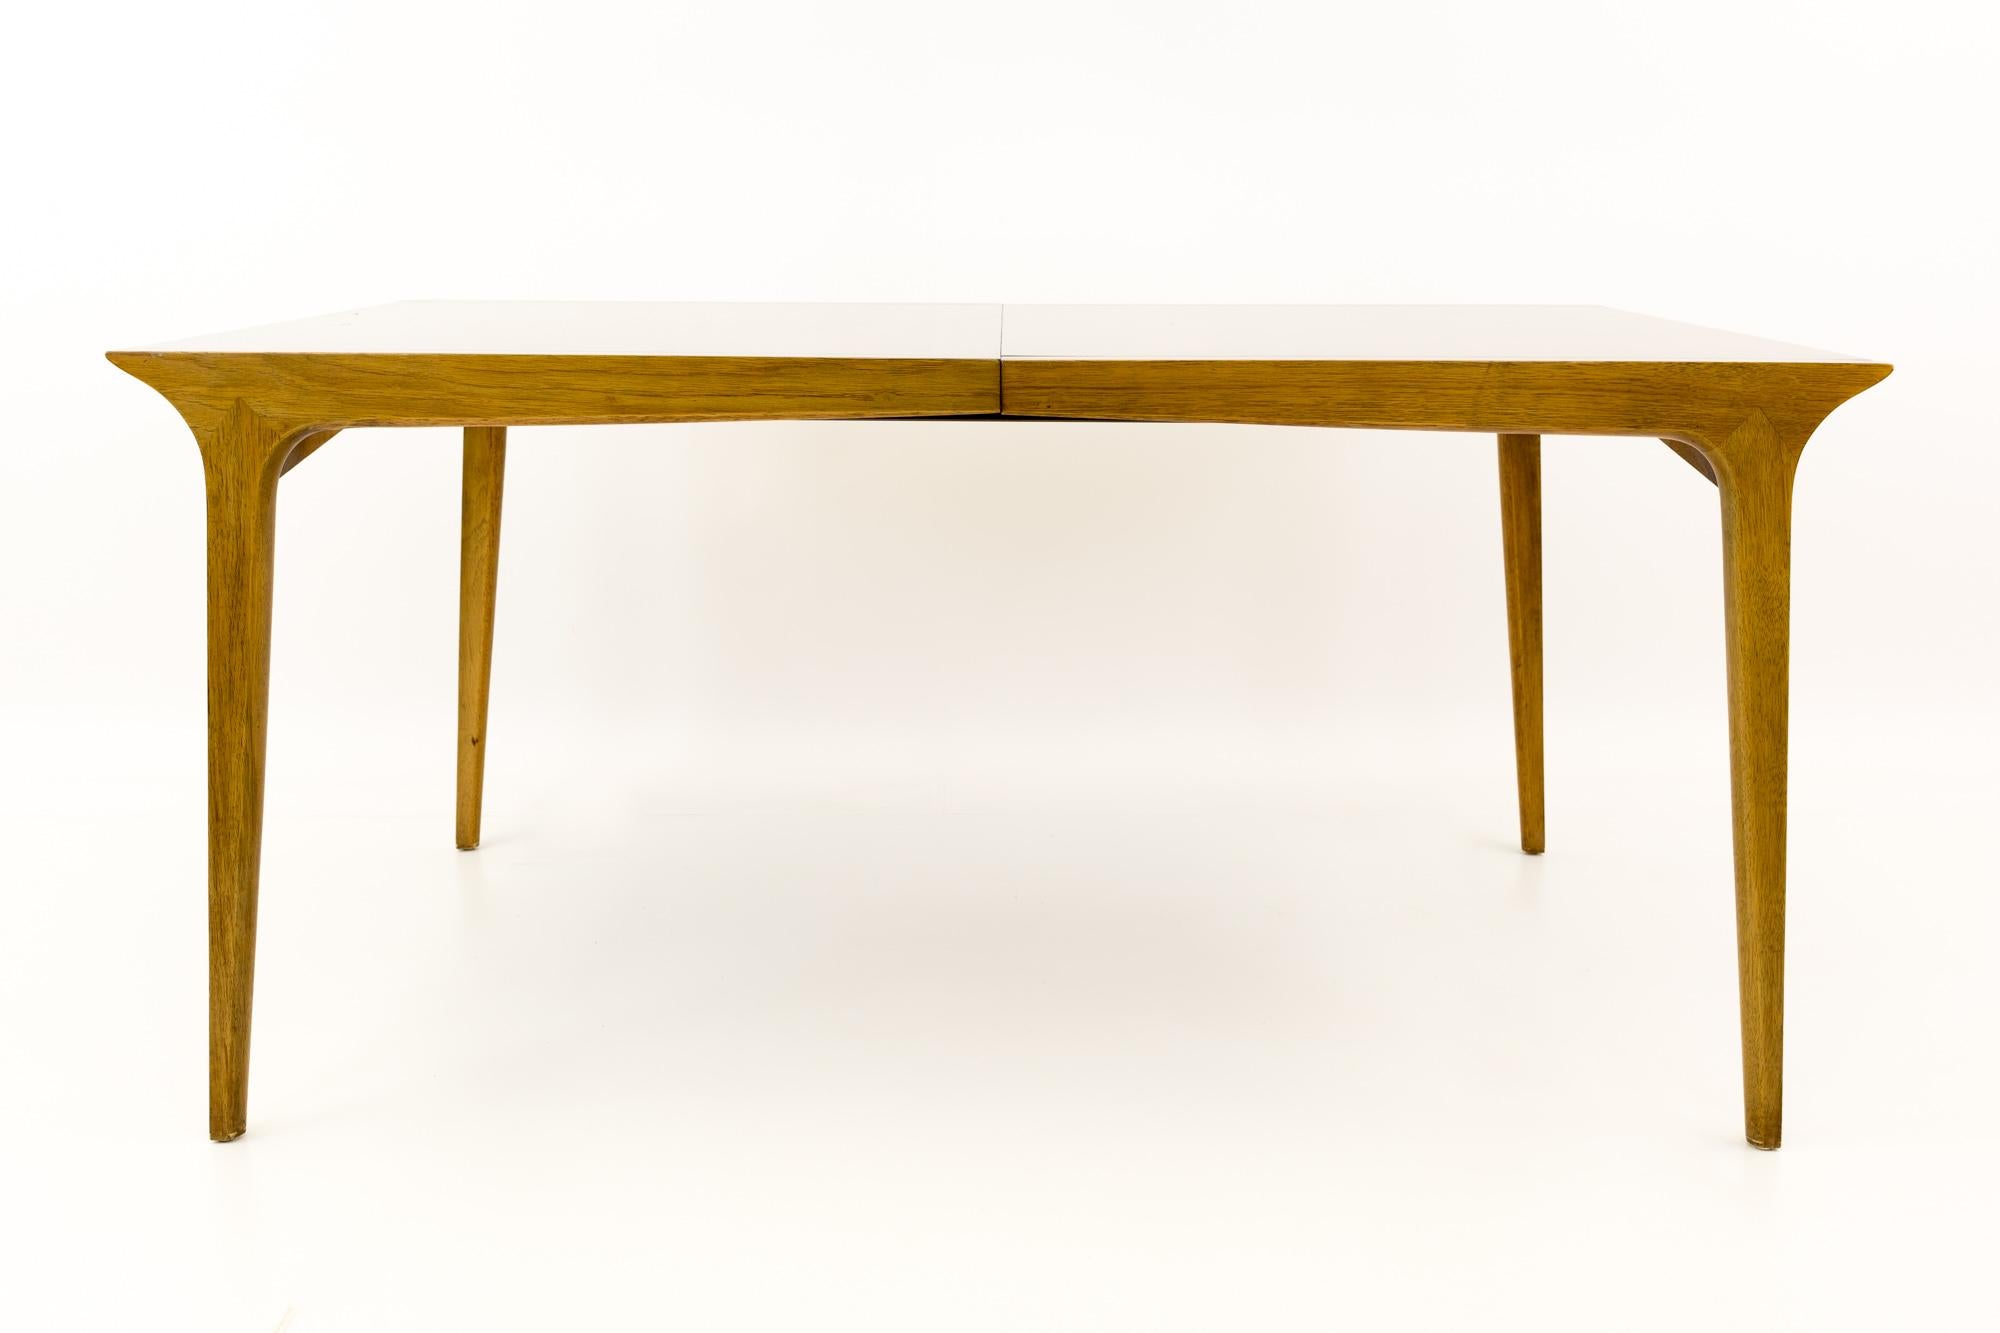 Paul McCobb Style John Van Koert for Drexel Profile Mid Century 10 Person dining table

This table measures 54 wide x 36 deep x 29 inches high, with a chair clearance of 27 inches; each leaf is 12 inches wide, making a maximum table width of 90